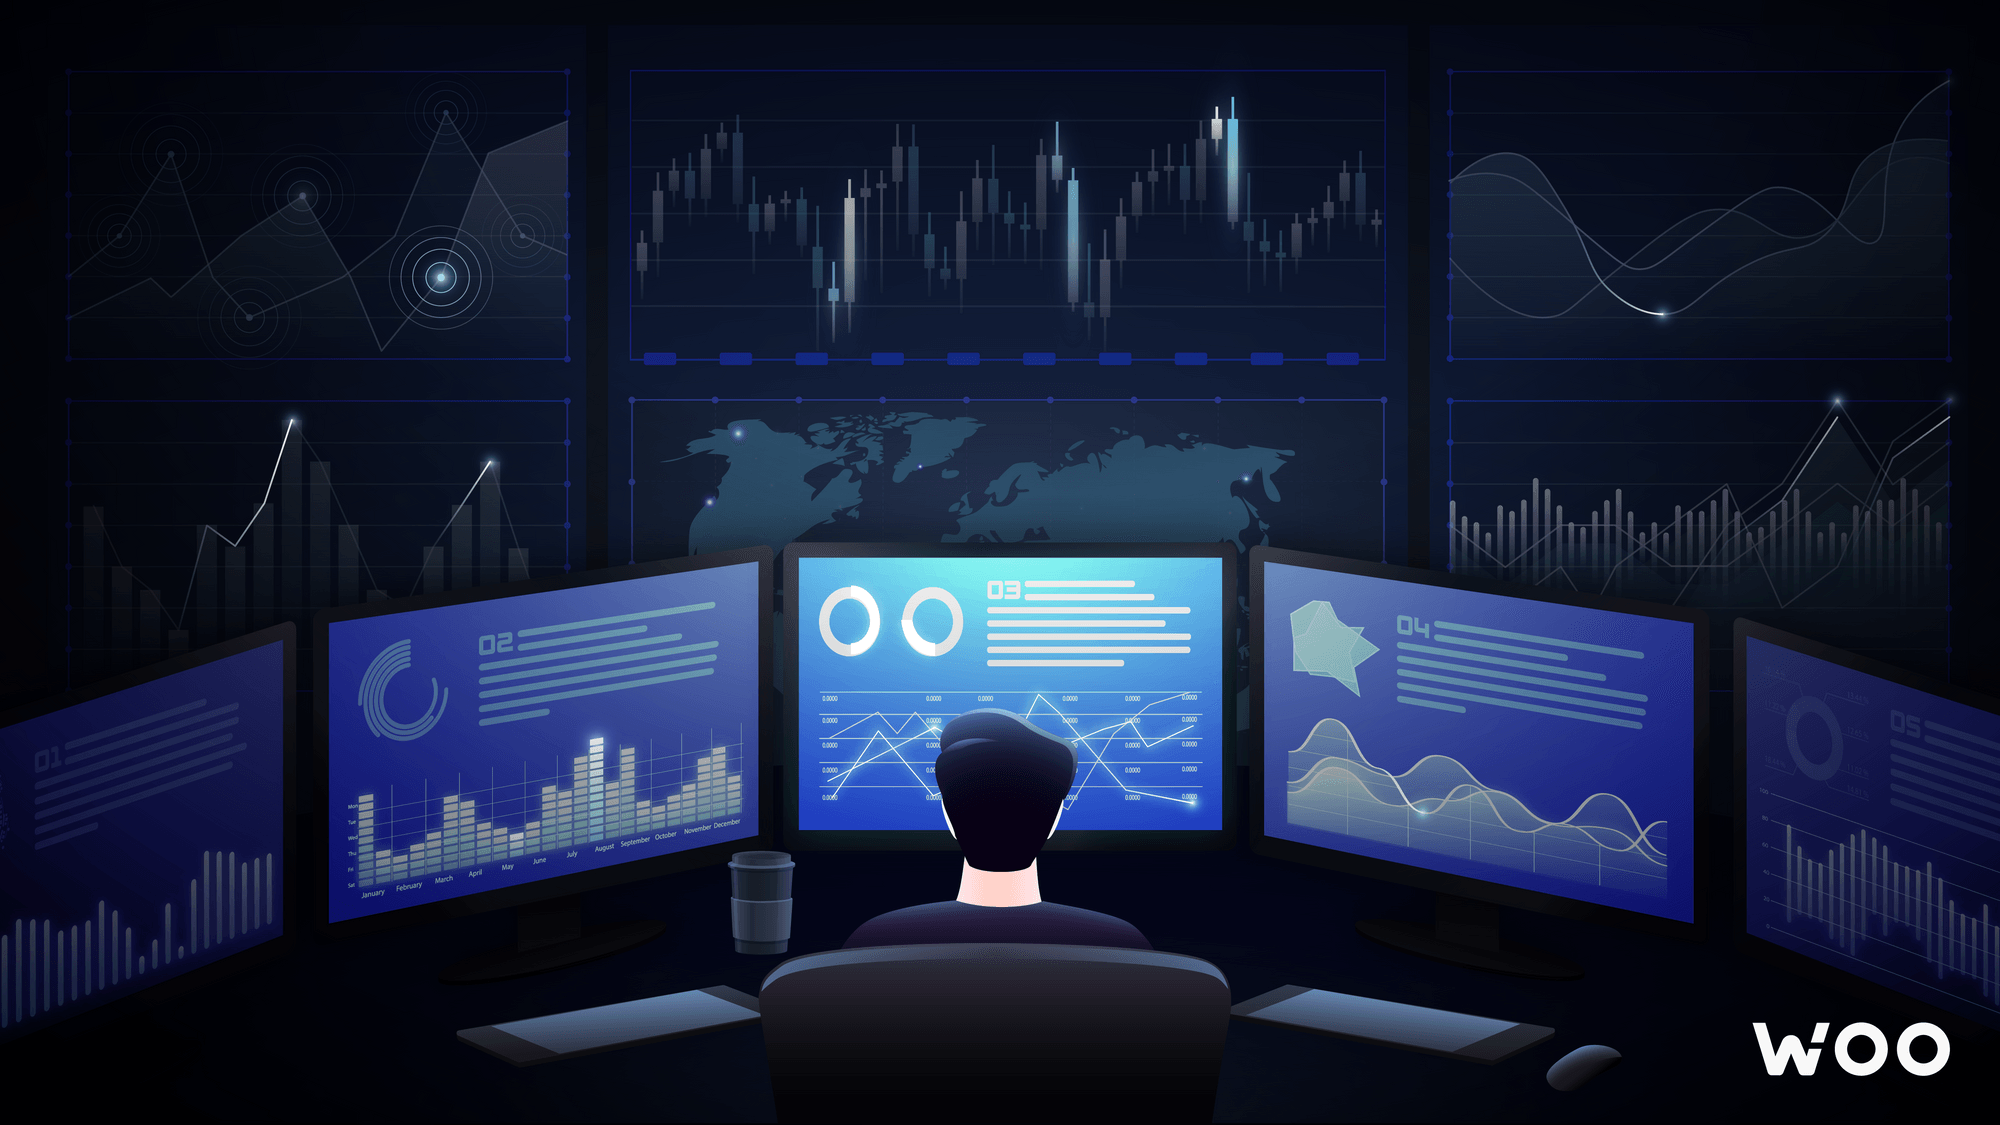 How to minimize FOMO and trade more clinically